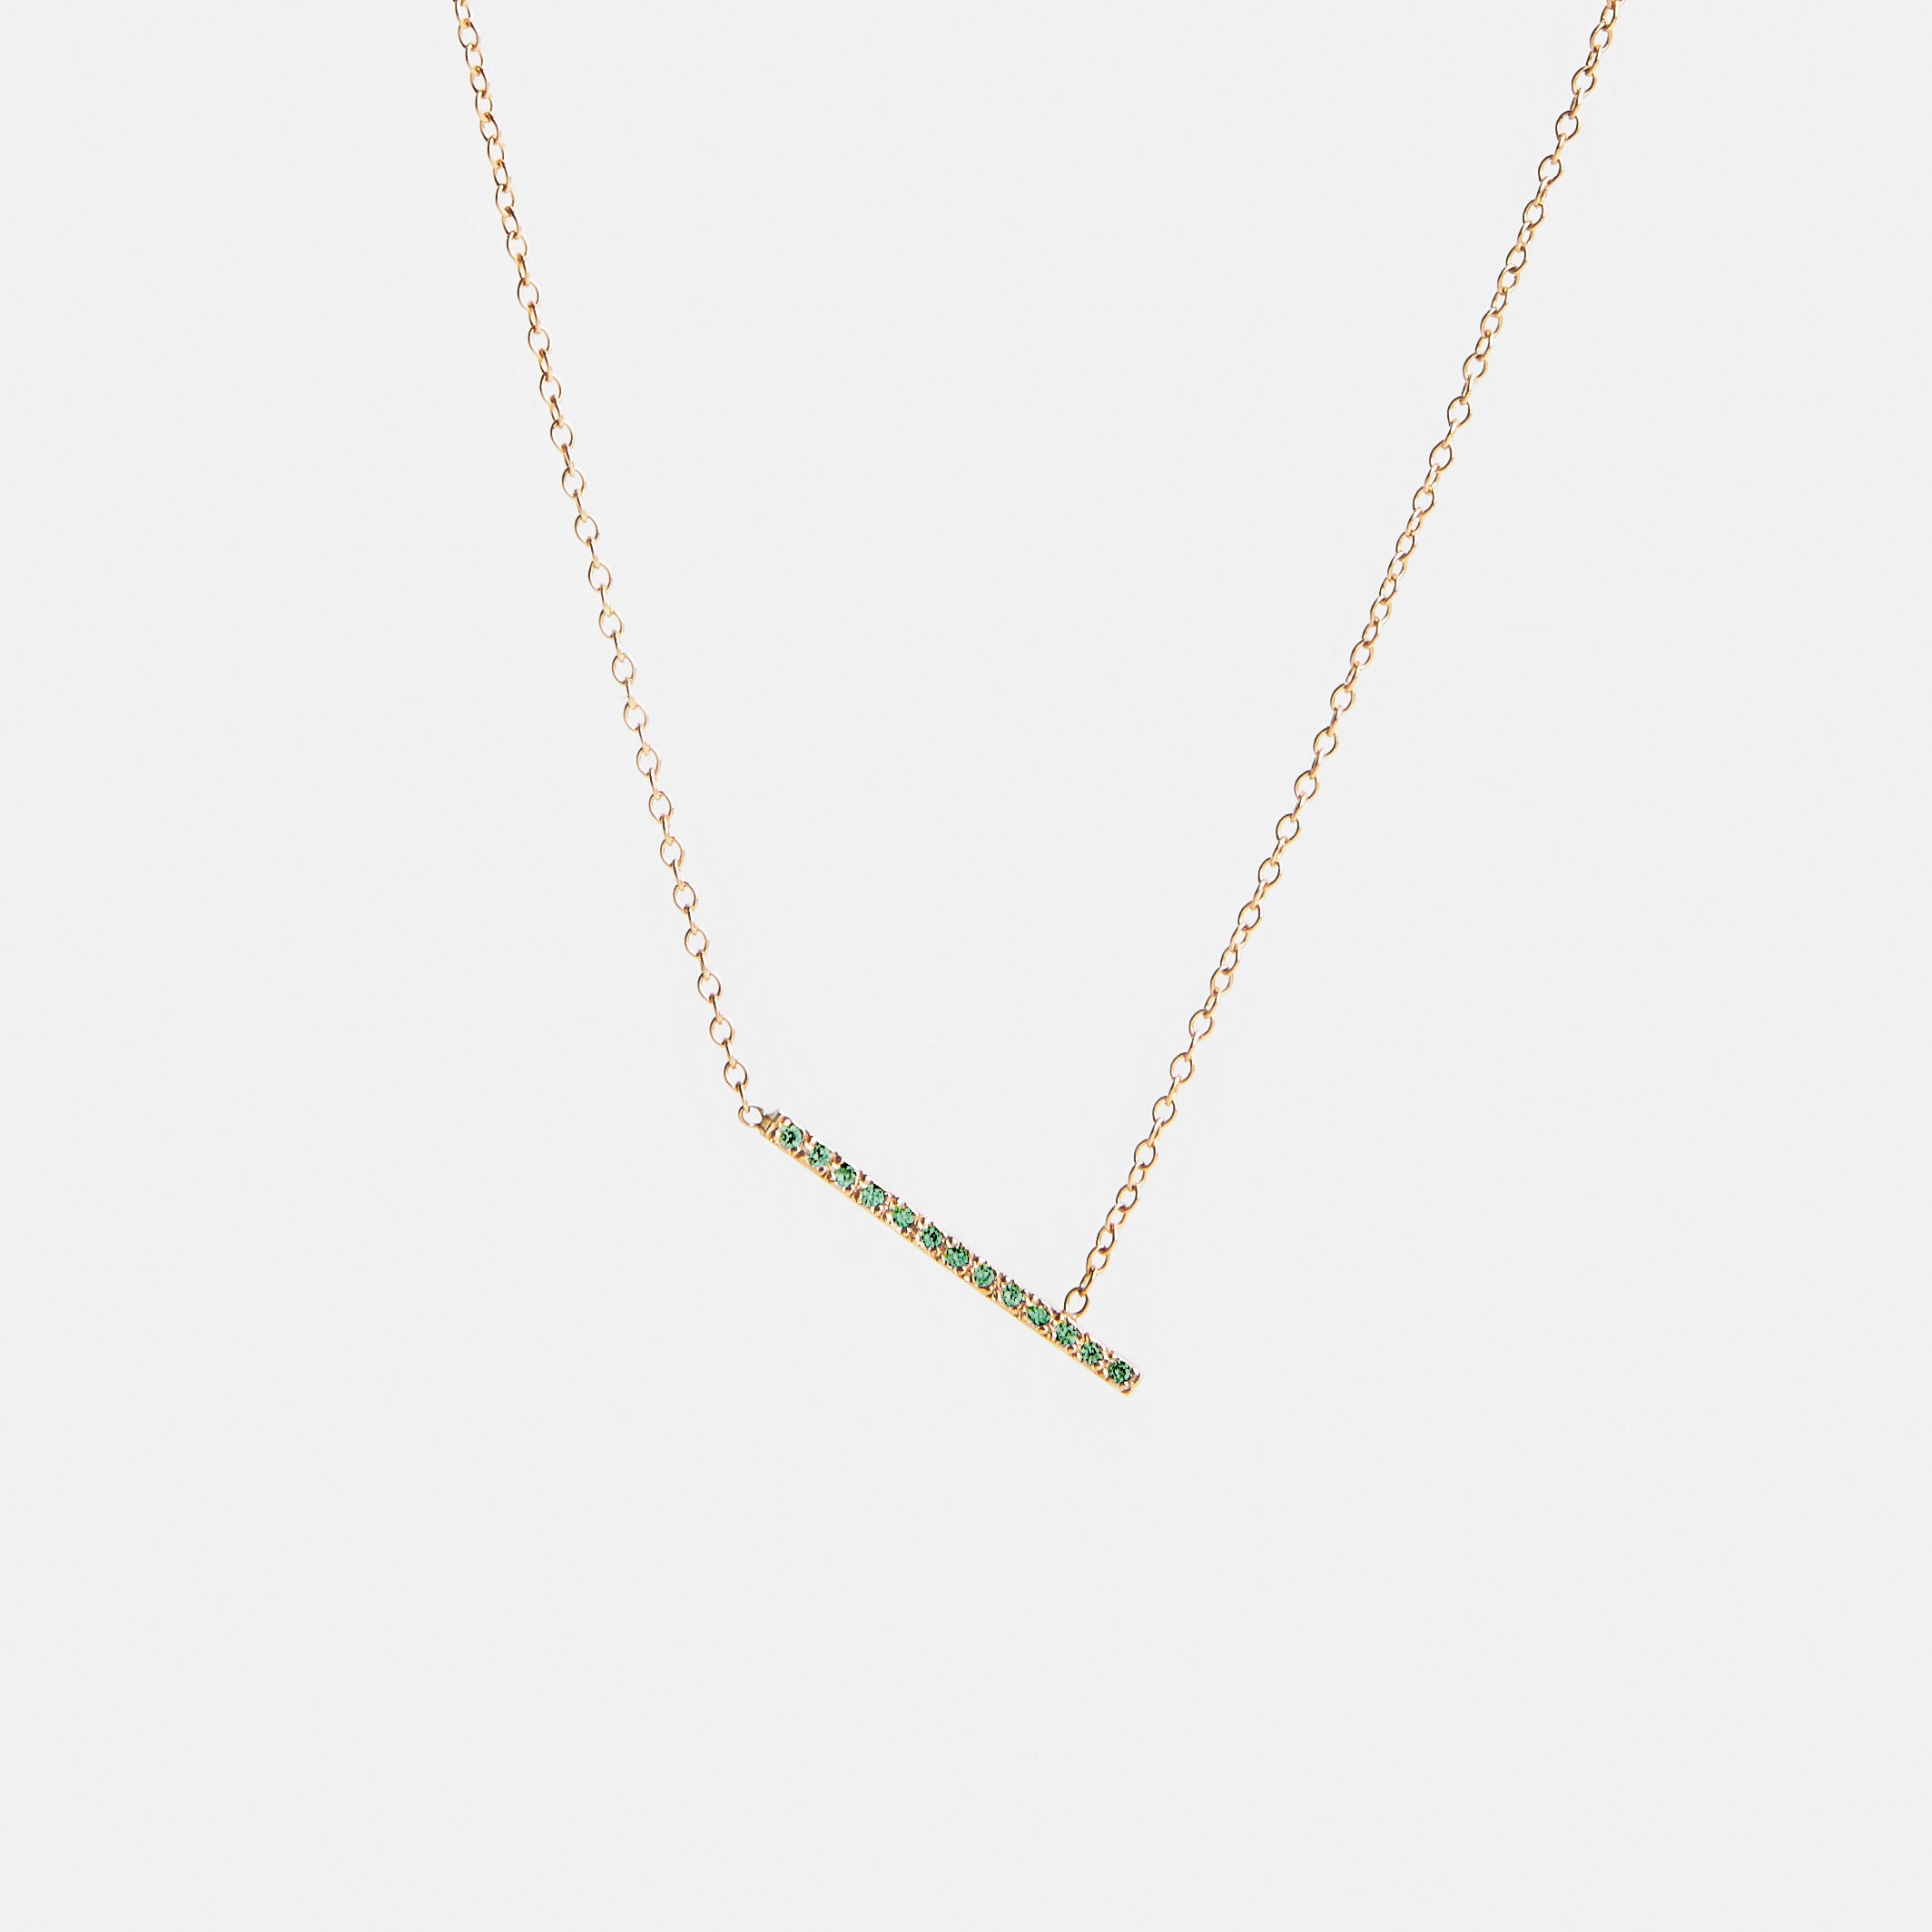 Tira Designer Necklace in 14k Gold set with Emeralds By SHW Fine Jewelry NYC